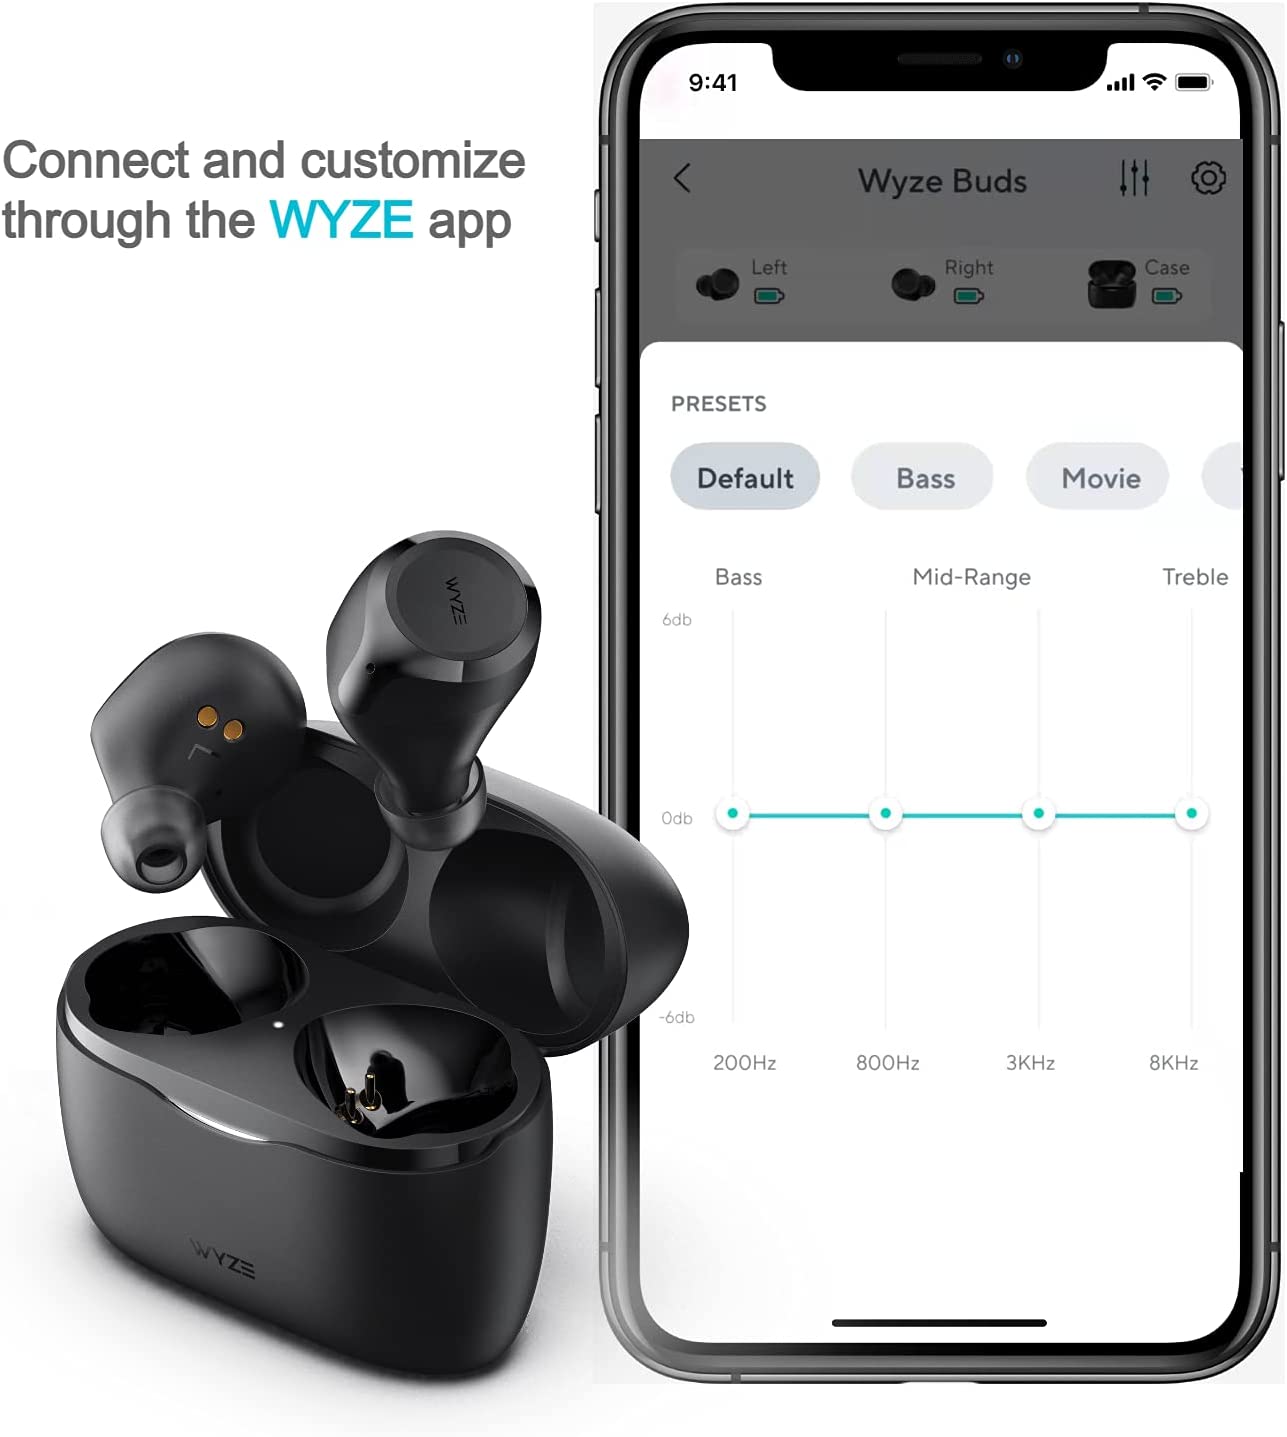 WYZE Wireless Earbuds 5.0 Bluetooth Headphones with IPX5 Sweat Resistance, 30 dB Noise Reduction,4 Voice-Isolating Mics, Alexa Built-in True Wireless Earbuds,Charging Case, Workout,Sports